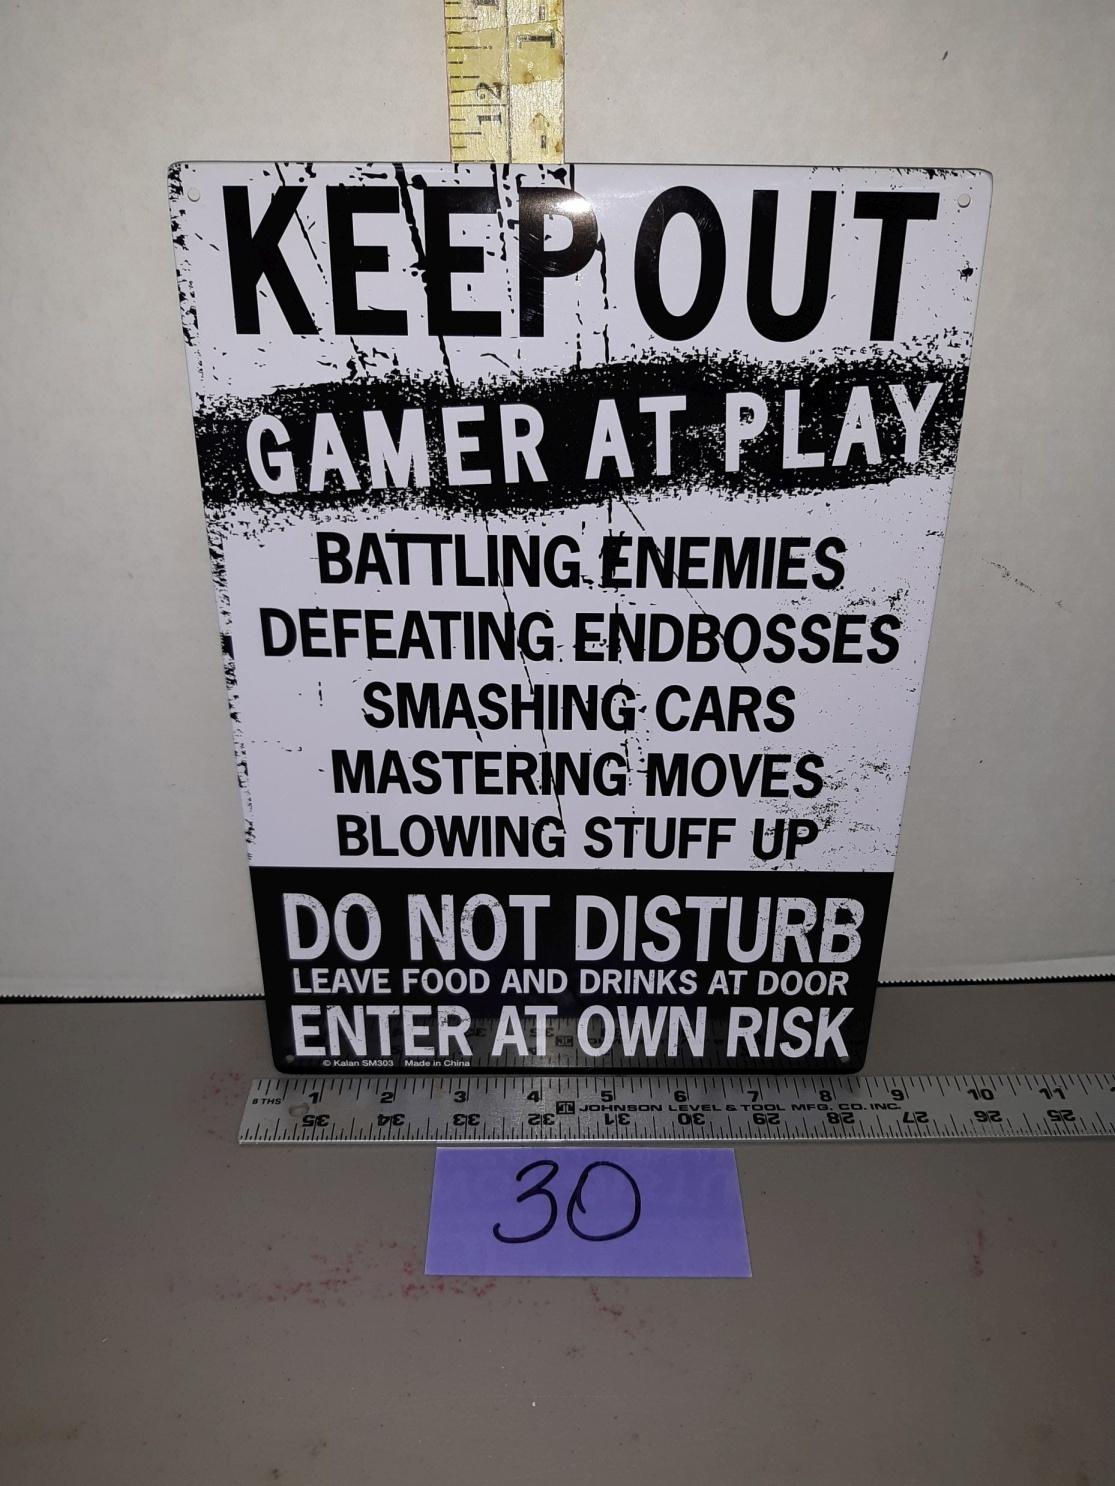 Metal Sign "Keep Out Gamer At Play", like new